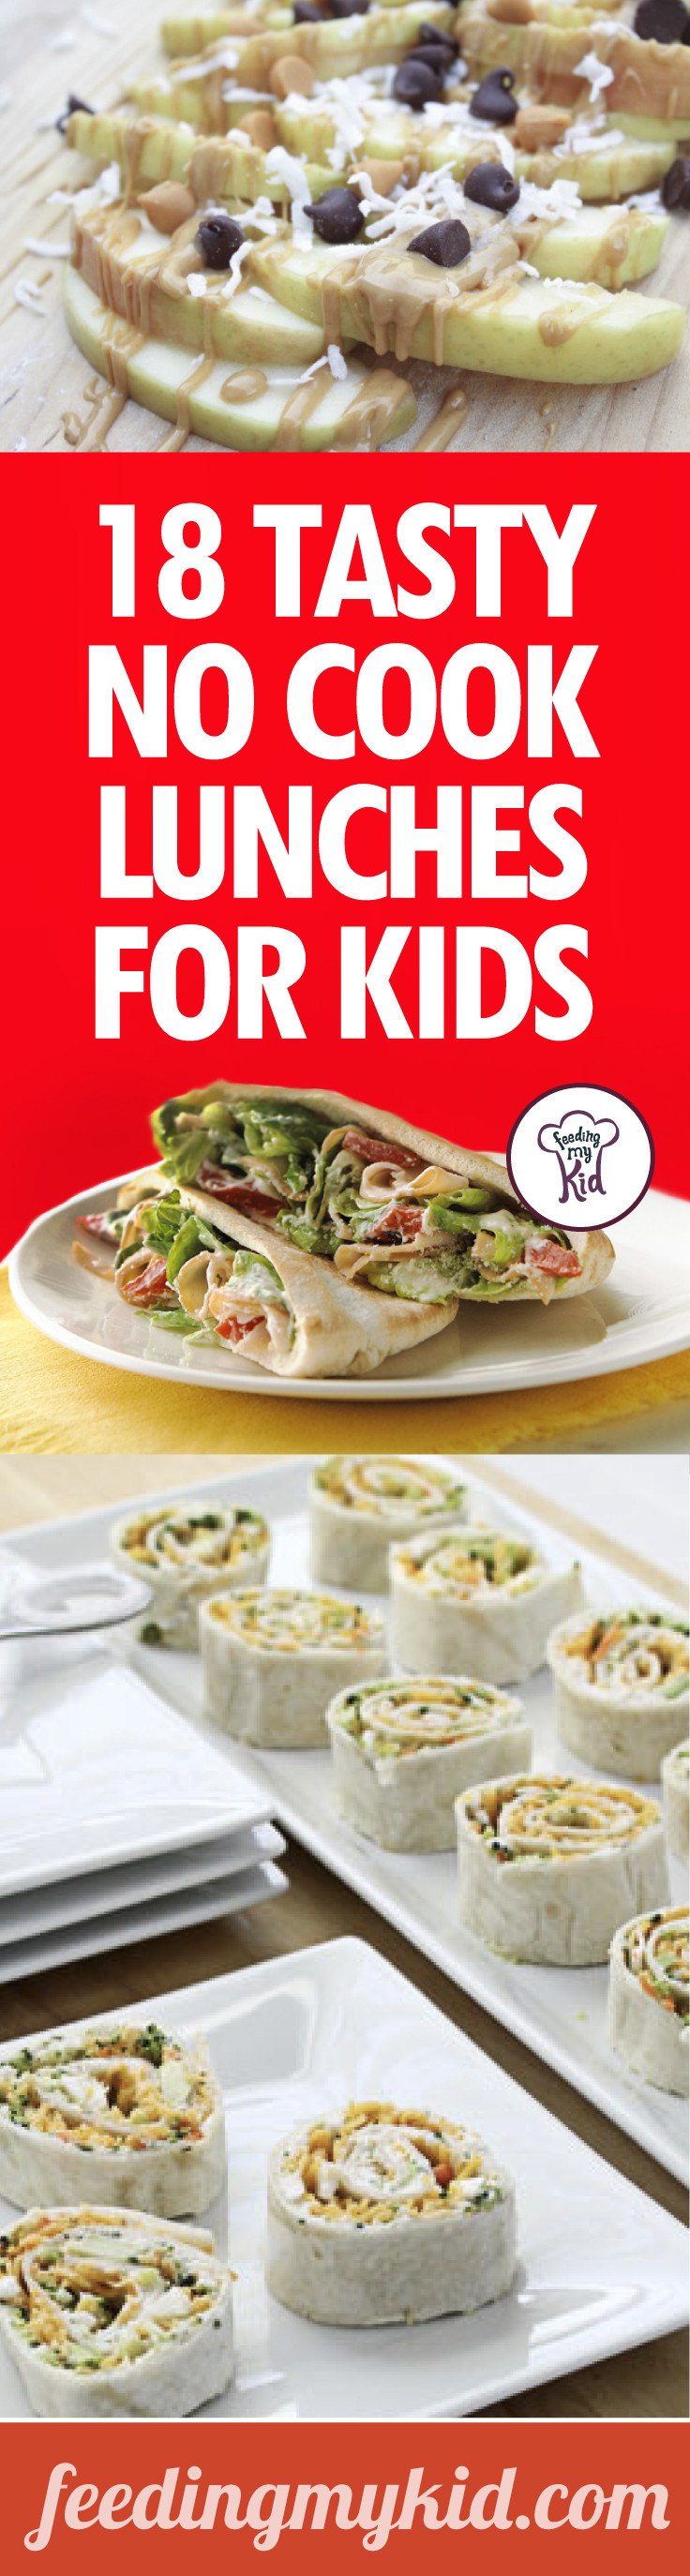 Healthy No Cook Lunches
 No Cook Lunches for Kids 18 Tasty Ideas for Your Kid s Lunch